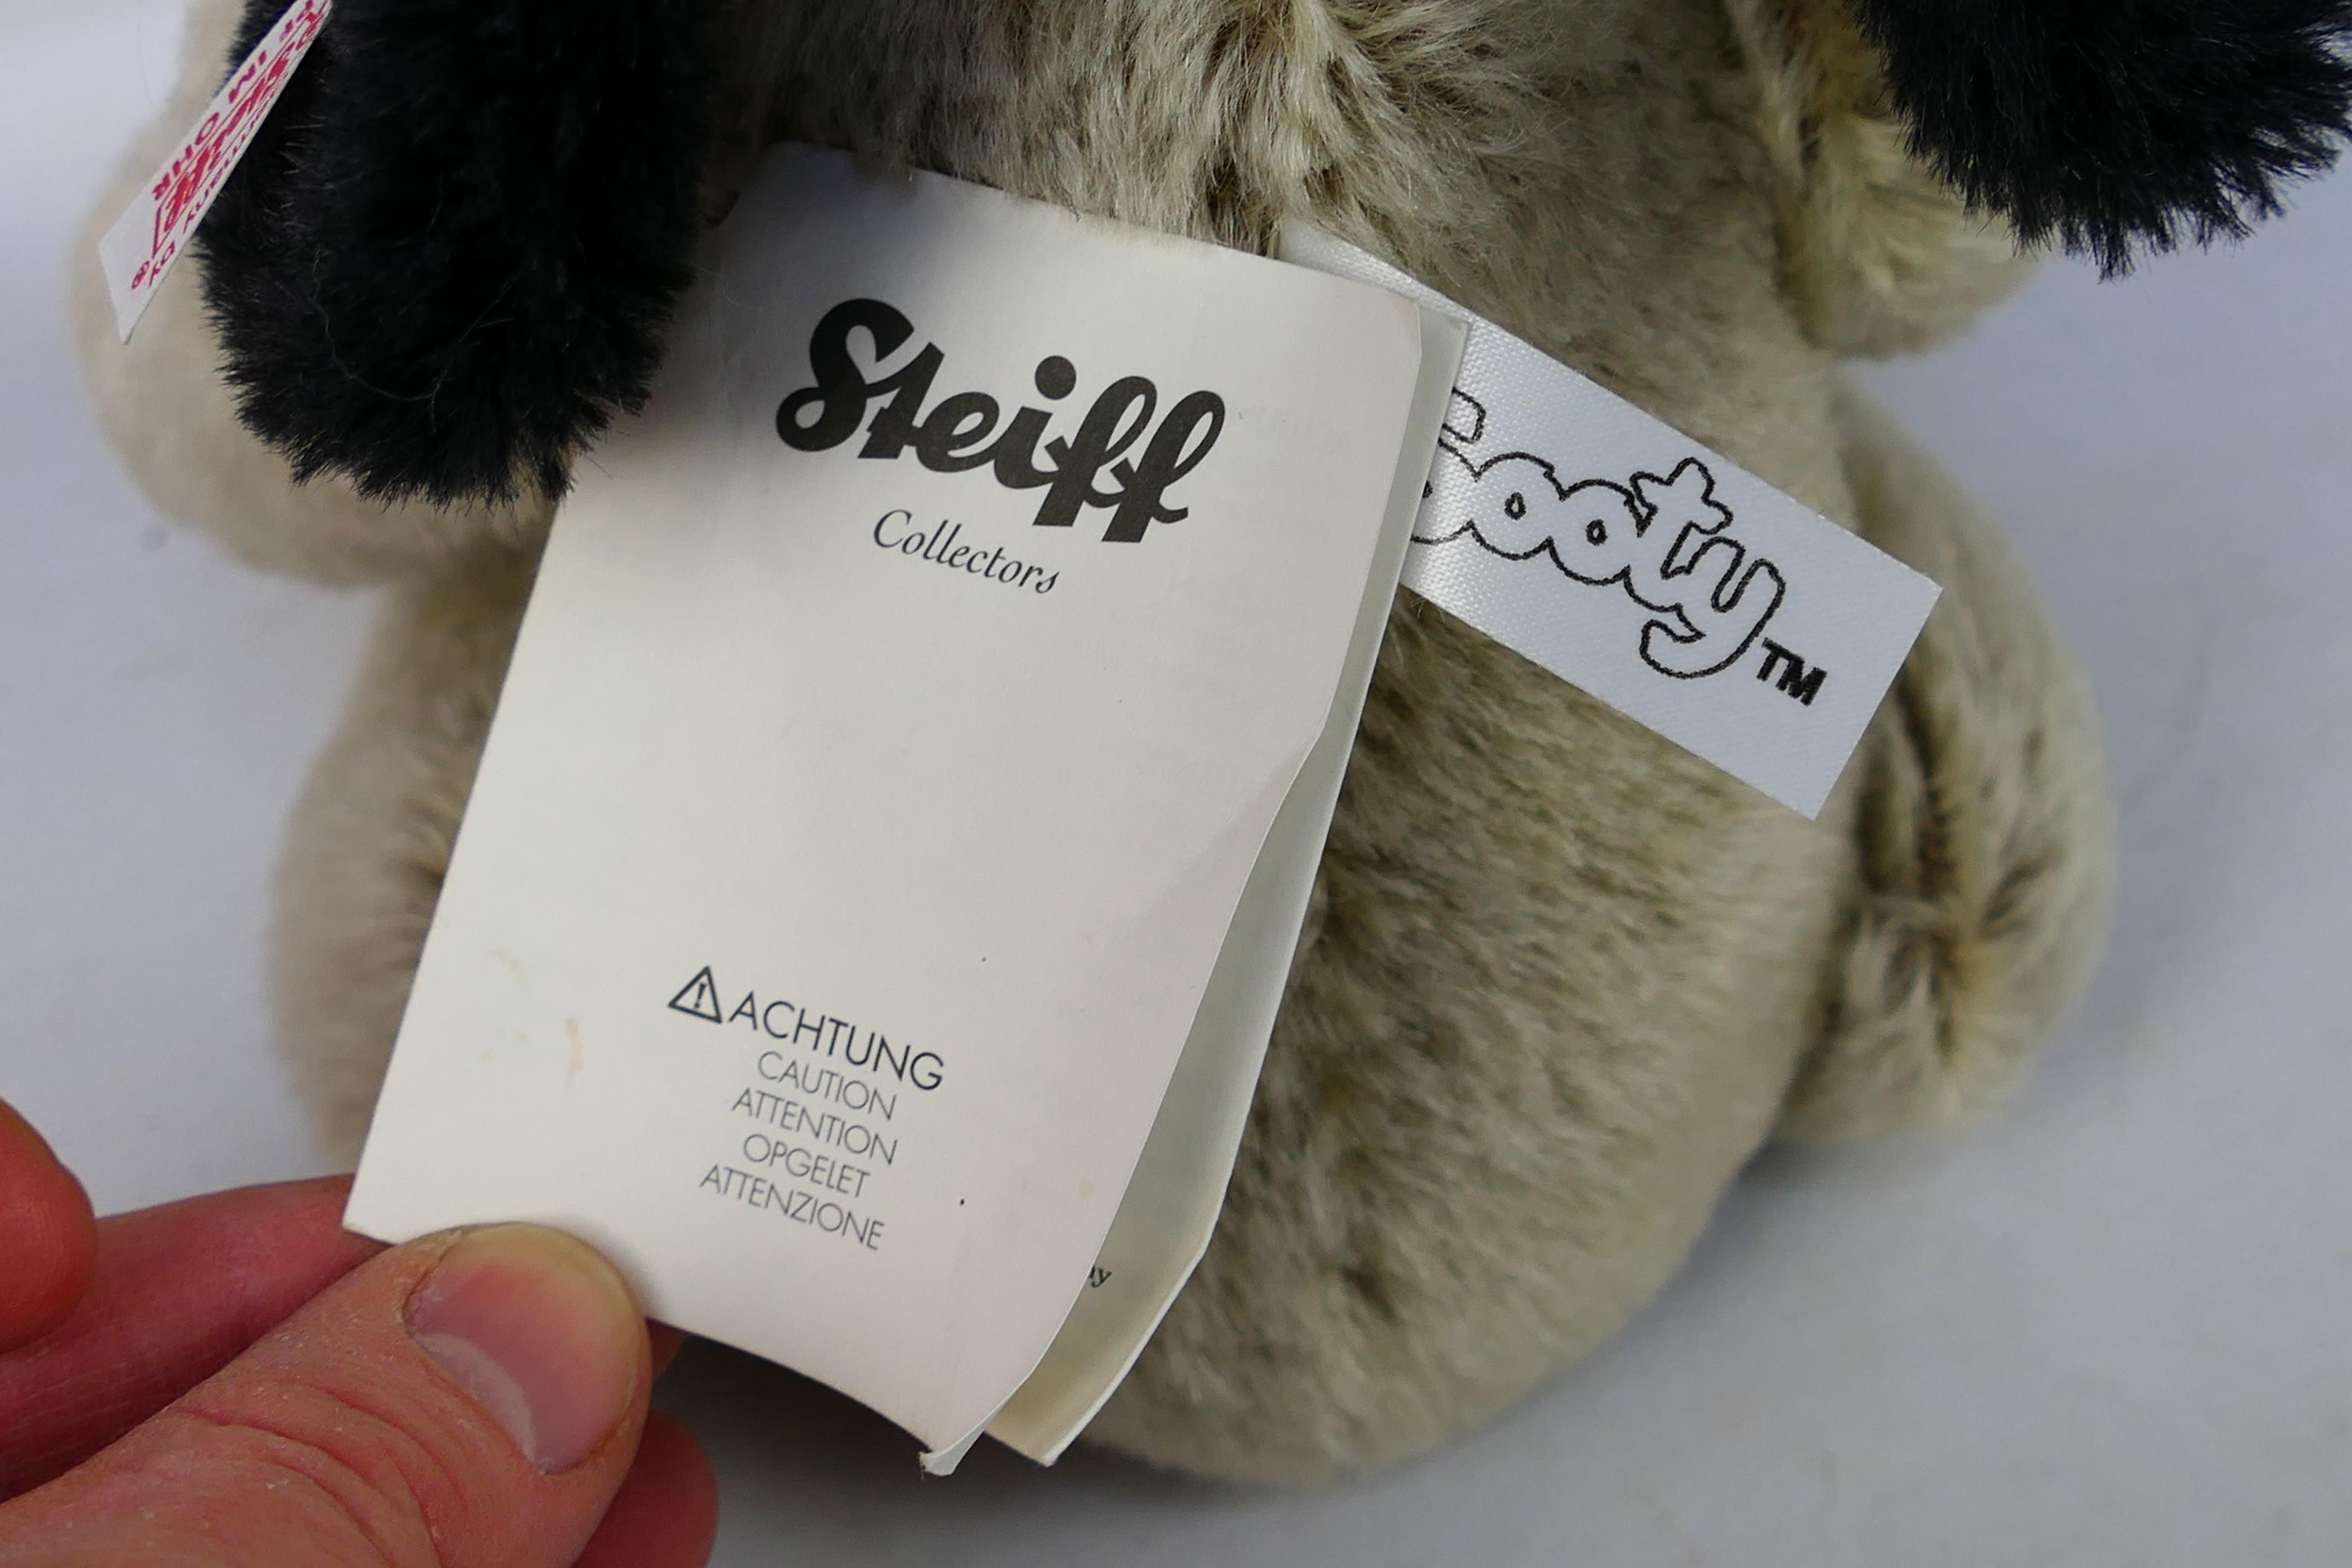 Steiff - Sooty Show - Plush - A Sweep Plush (#664410) from The Sooty Show, - Image 7 of 8